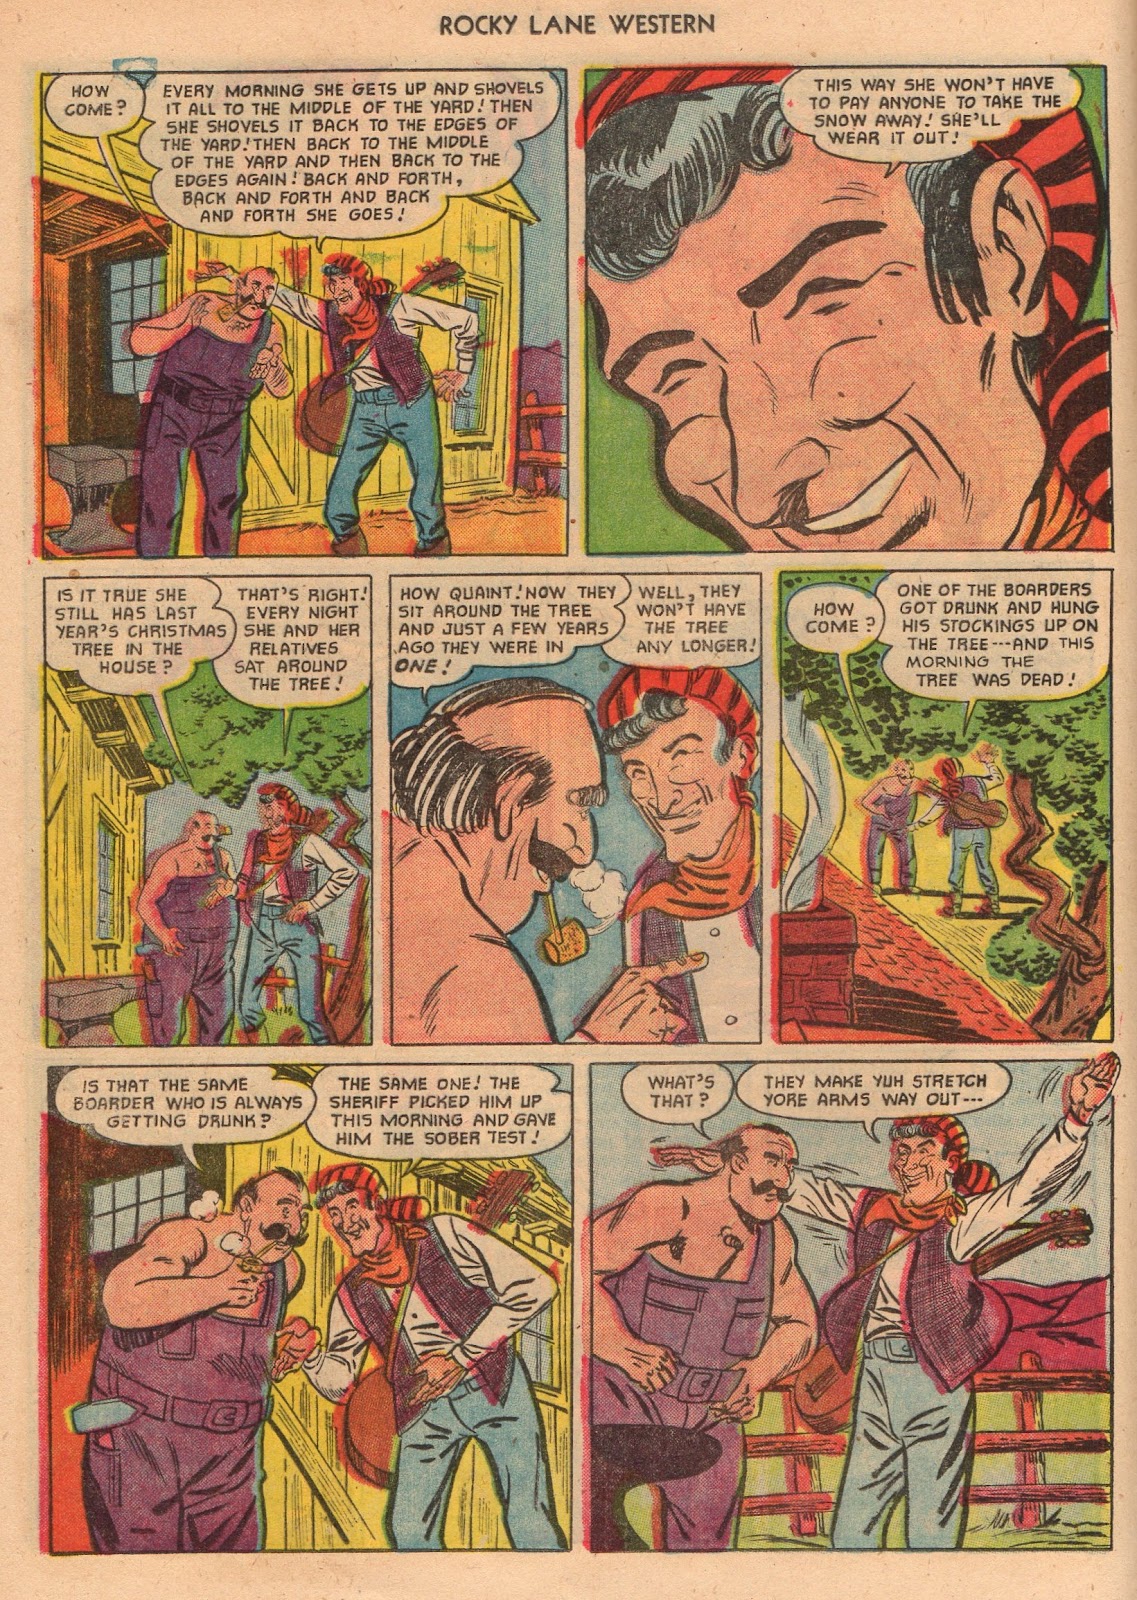 Rocky Lane Western (1954) issue 68 - Page 12